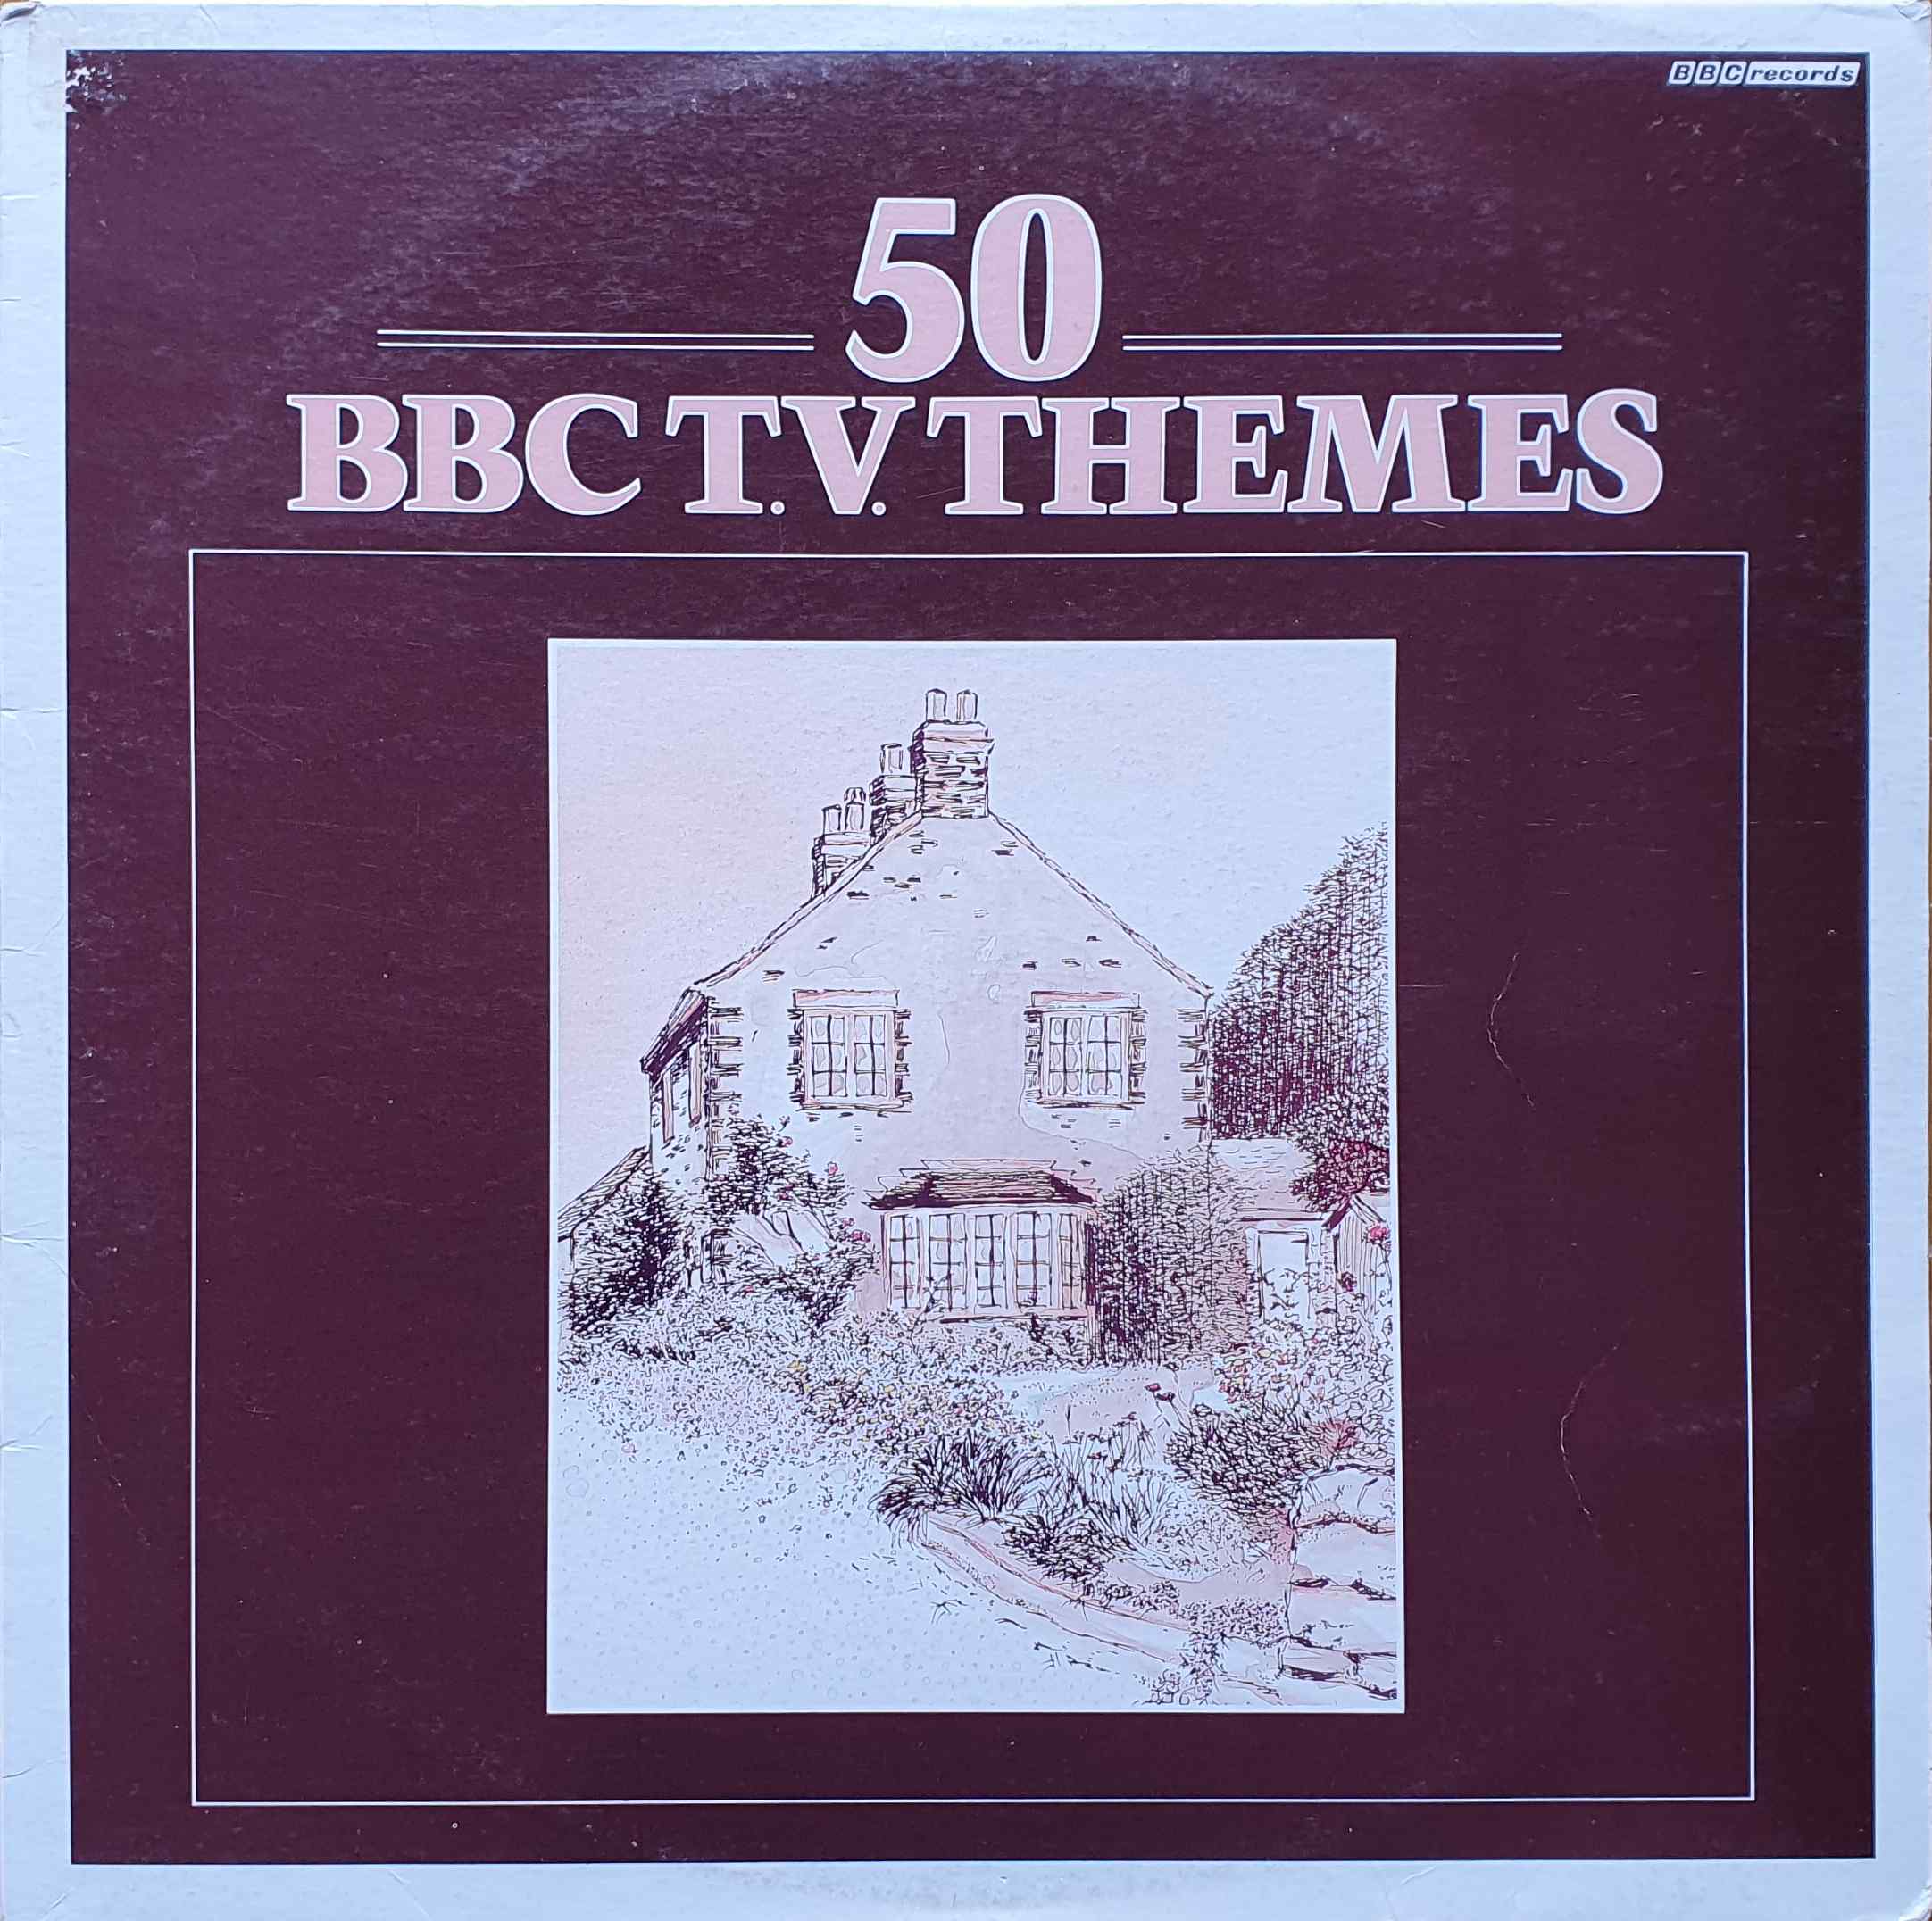 Picture of BBC 3006-iAUS 50 BBC TV themes by artist Various from the BBC albums - Records and Tapes library